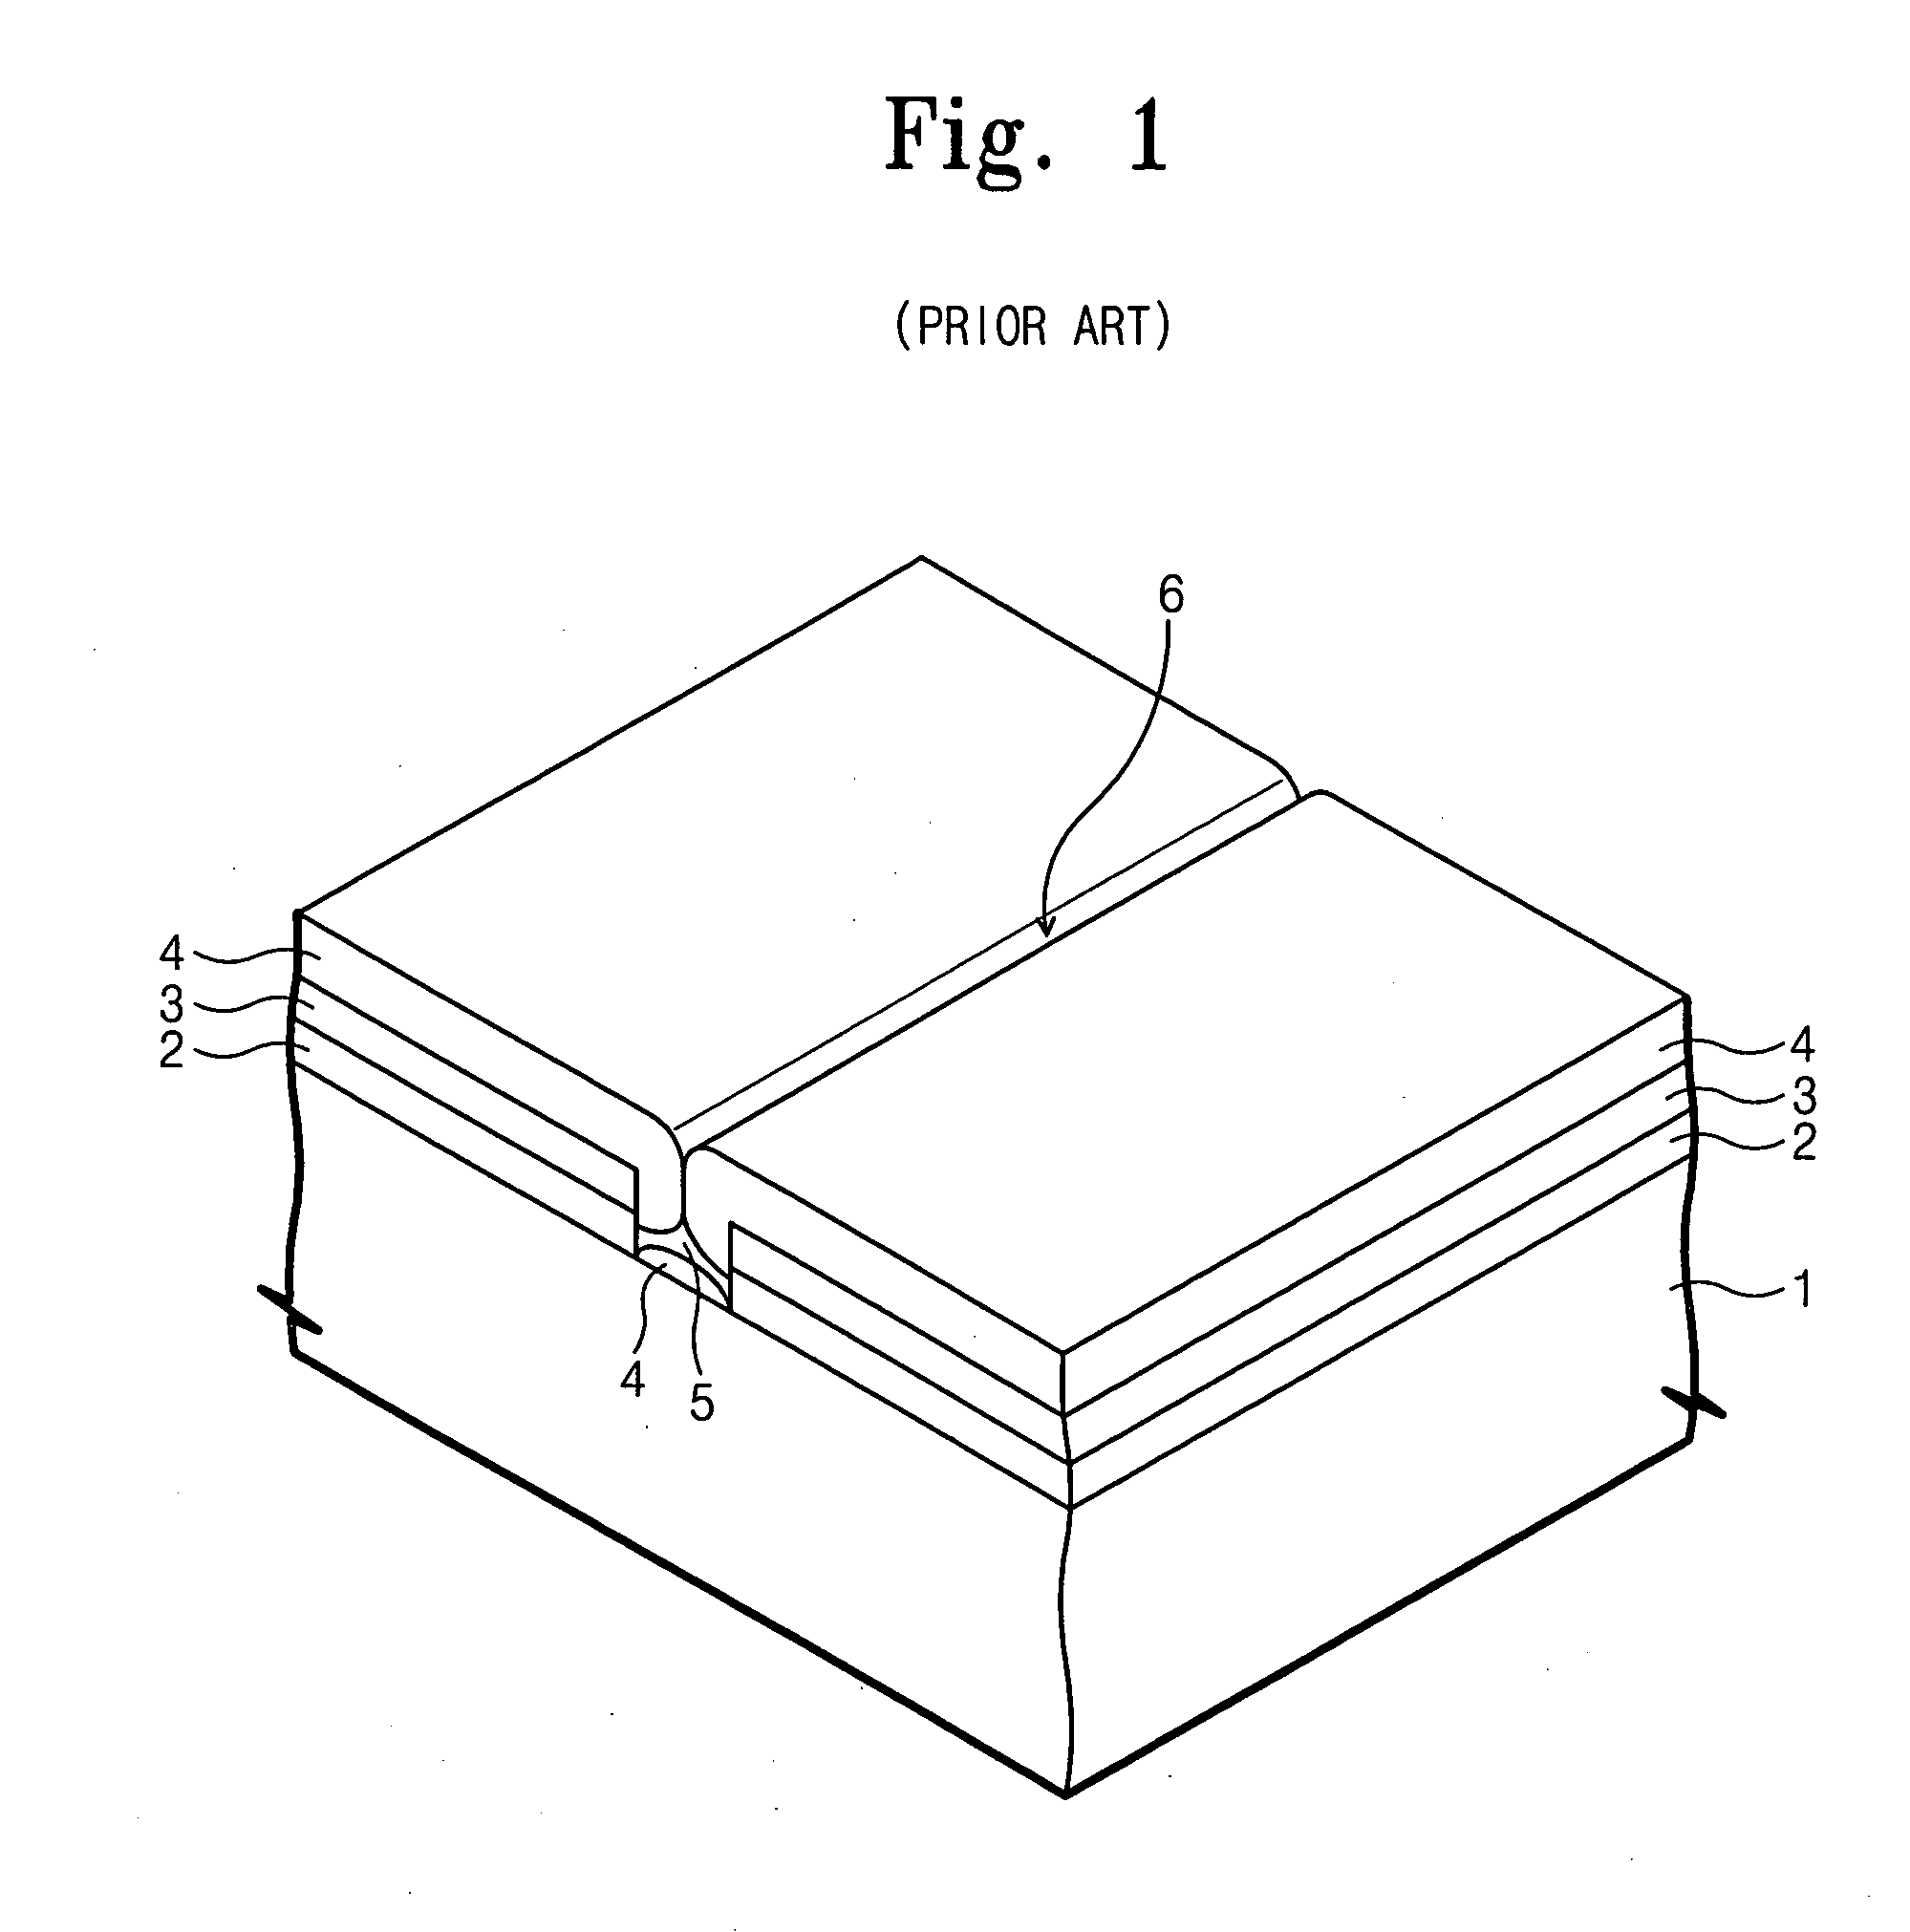 Semiconductor device having partially insulated field effect transistor (PiFET) and method of fabricating the same